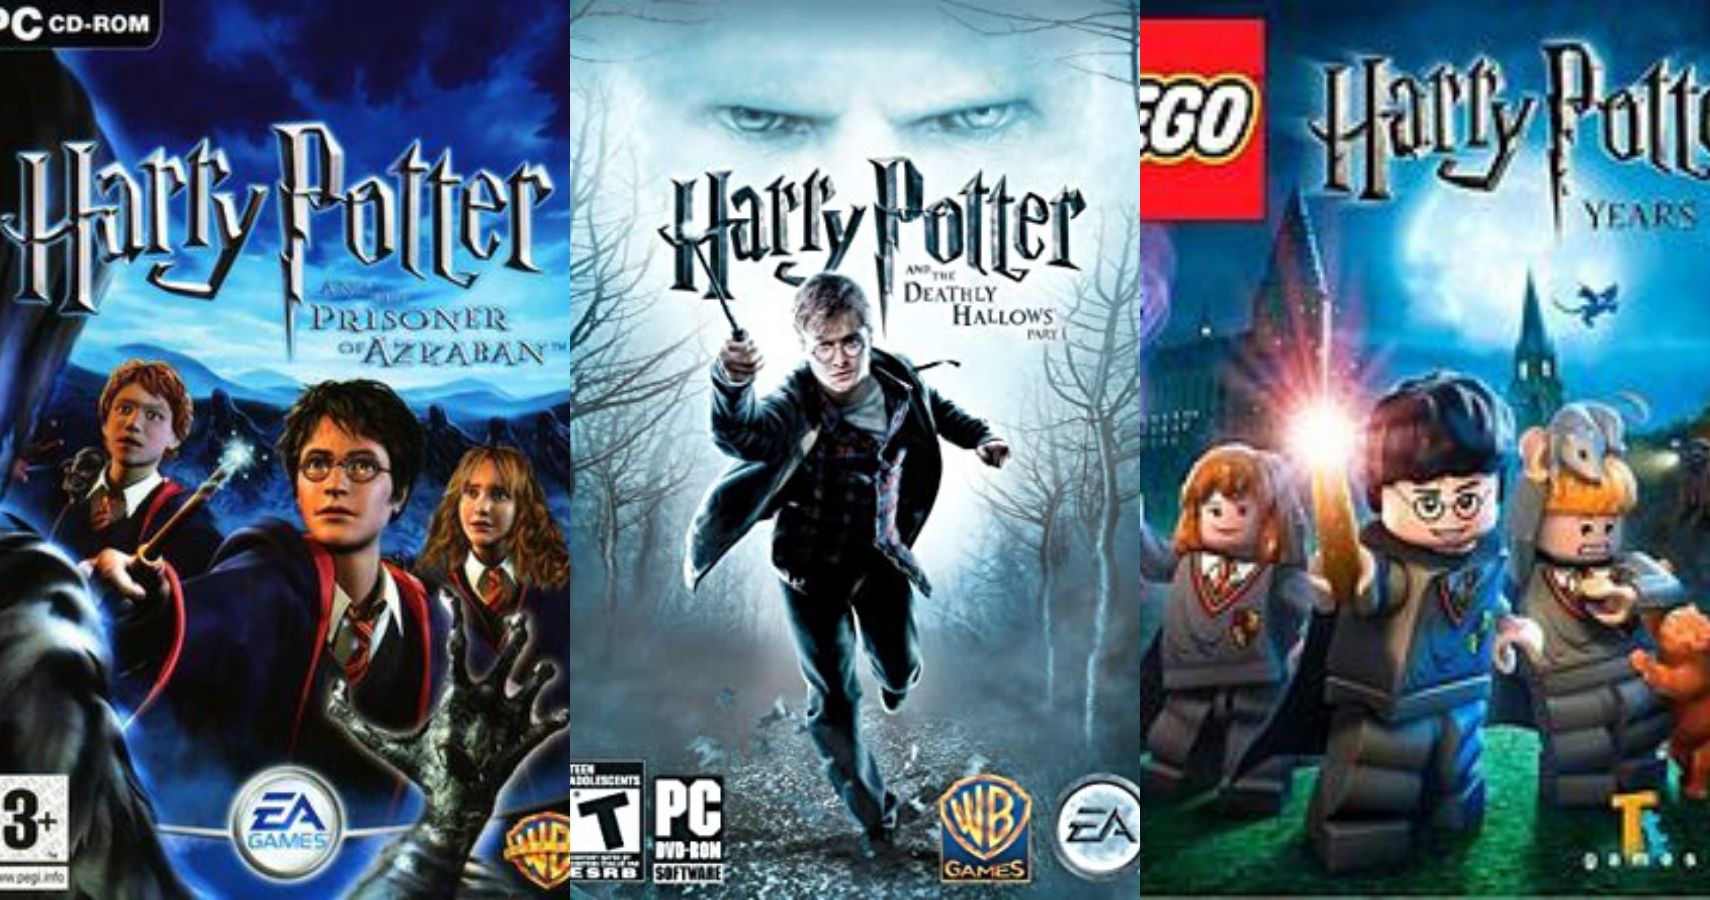 goblet of fire pc game cheats